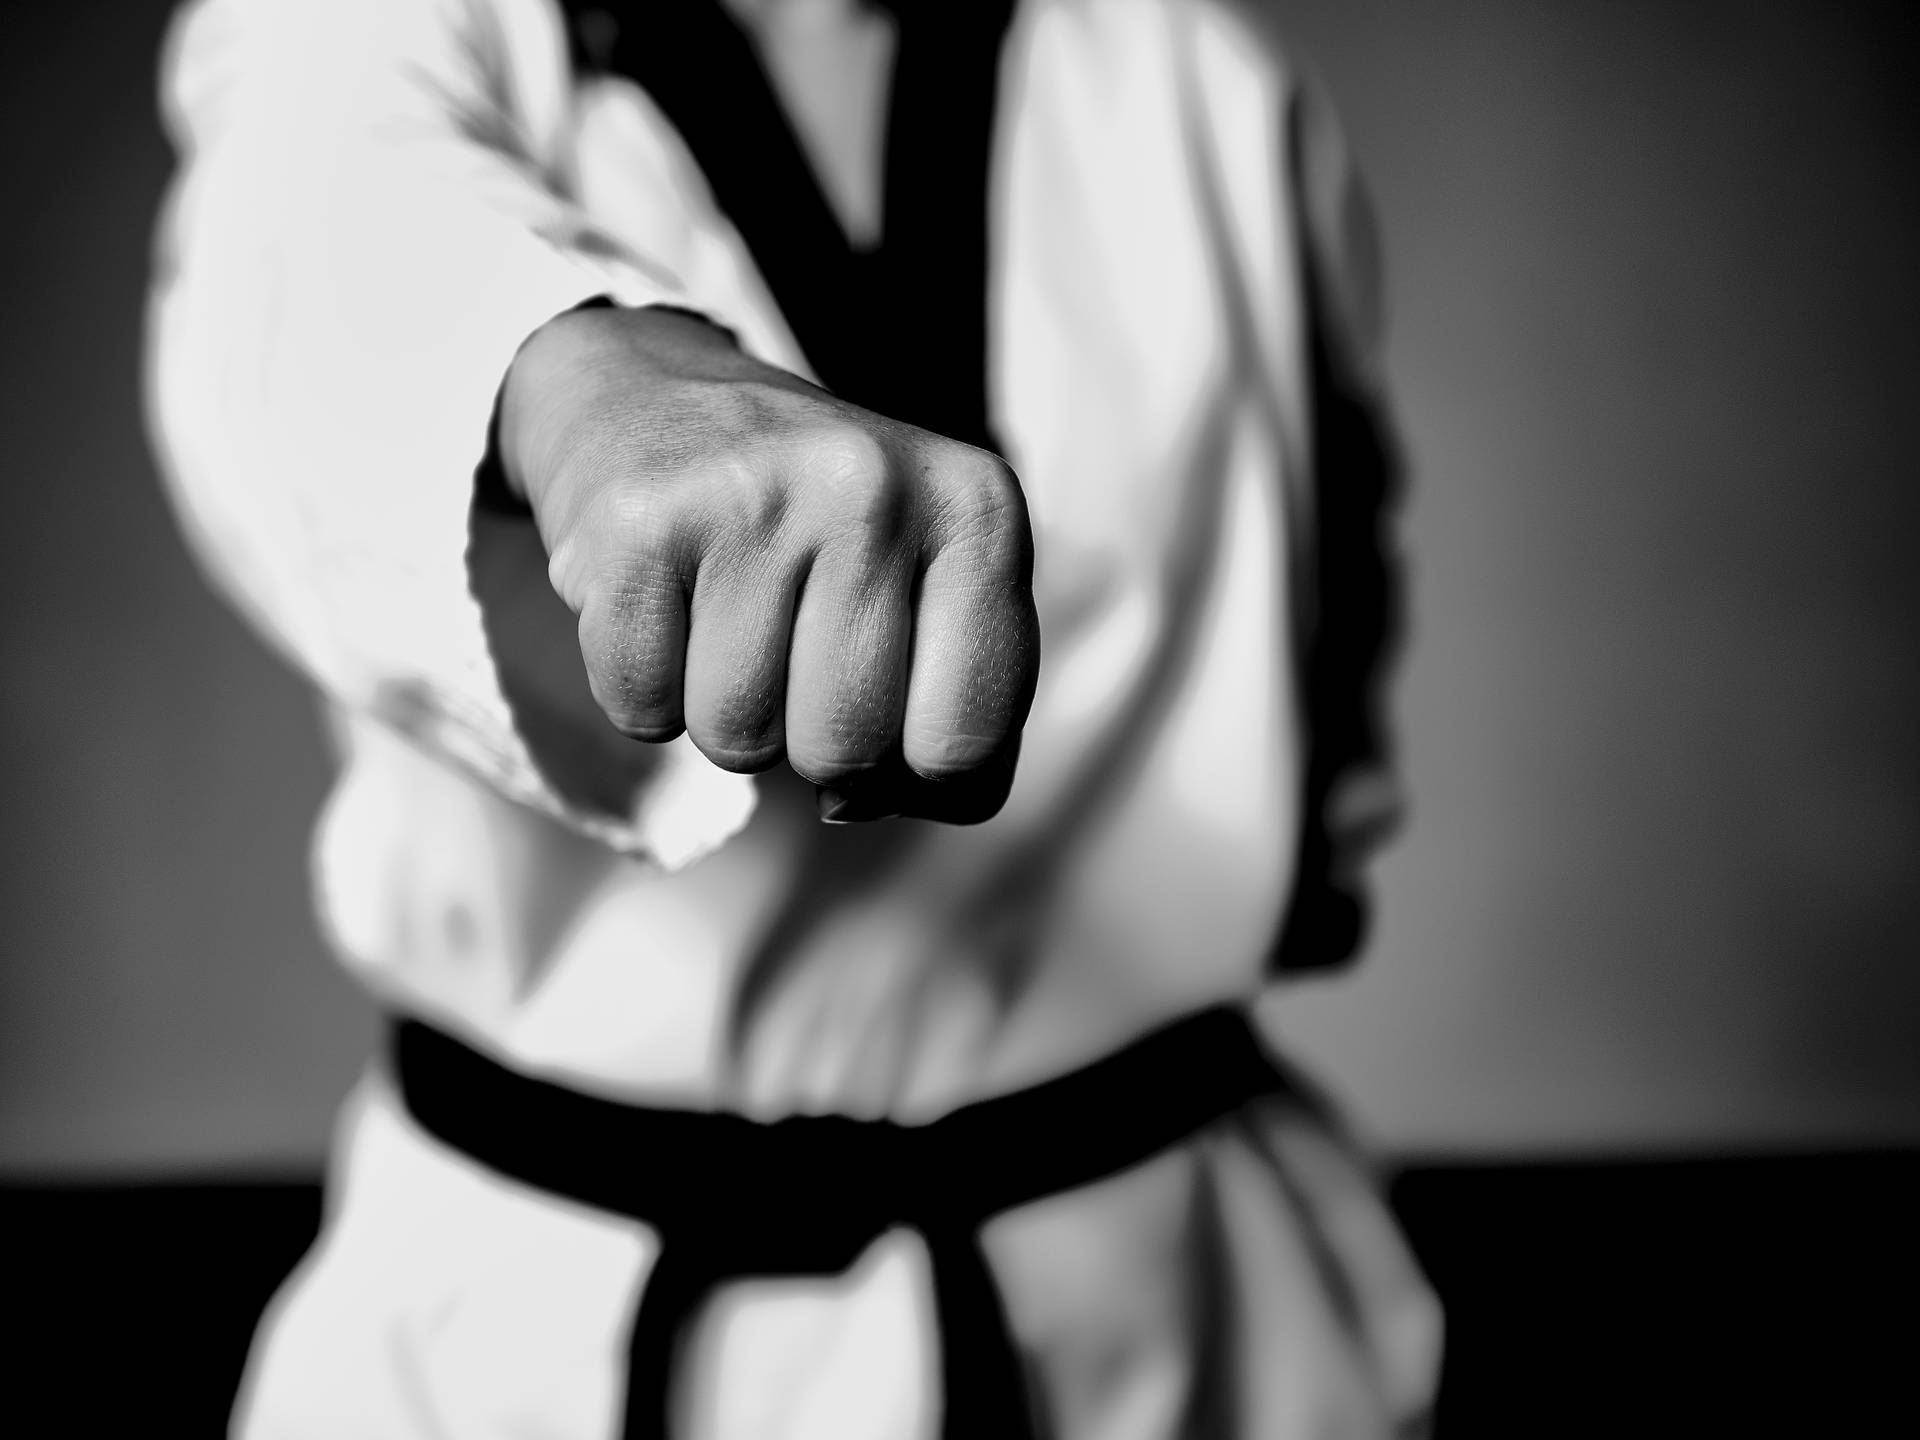 Taekwondo practitioner demonstrating a front hand middle punch in black and white Wallpaper